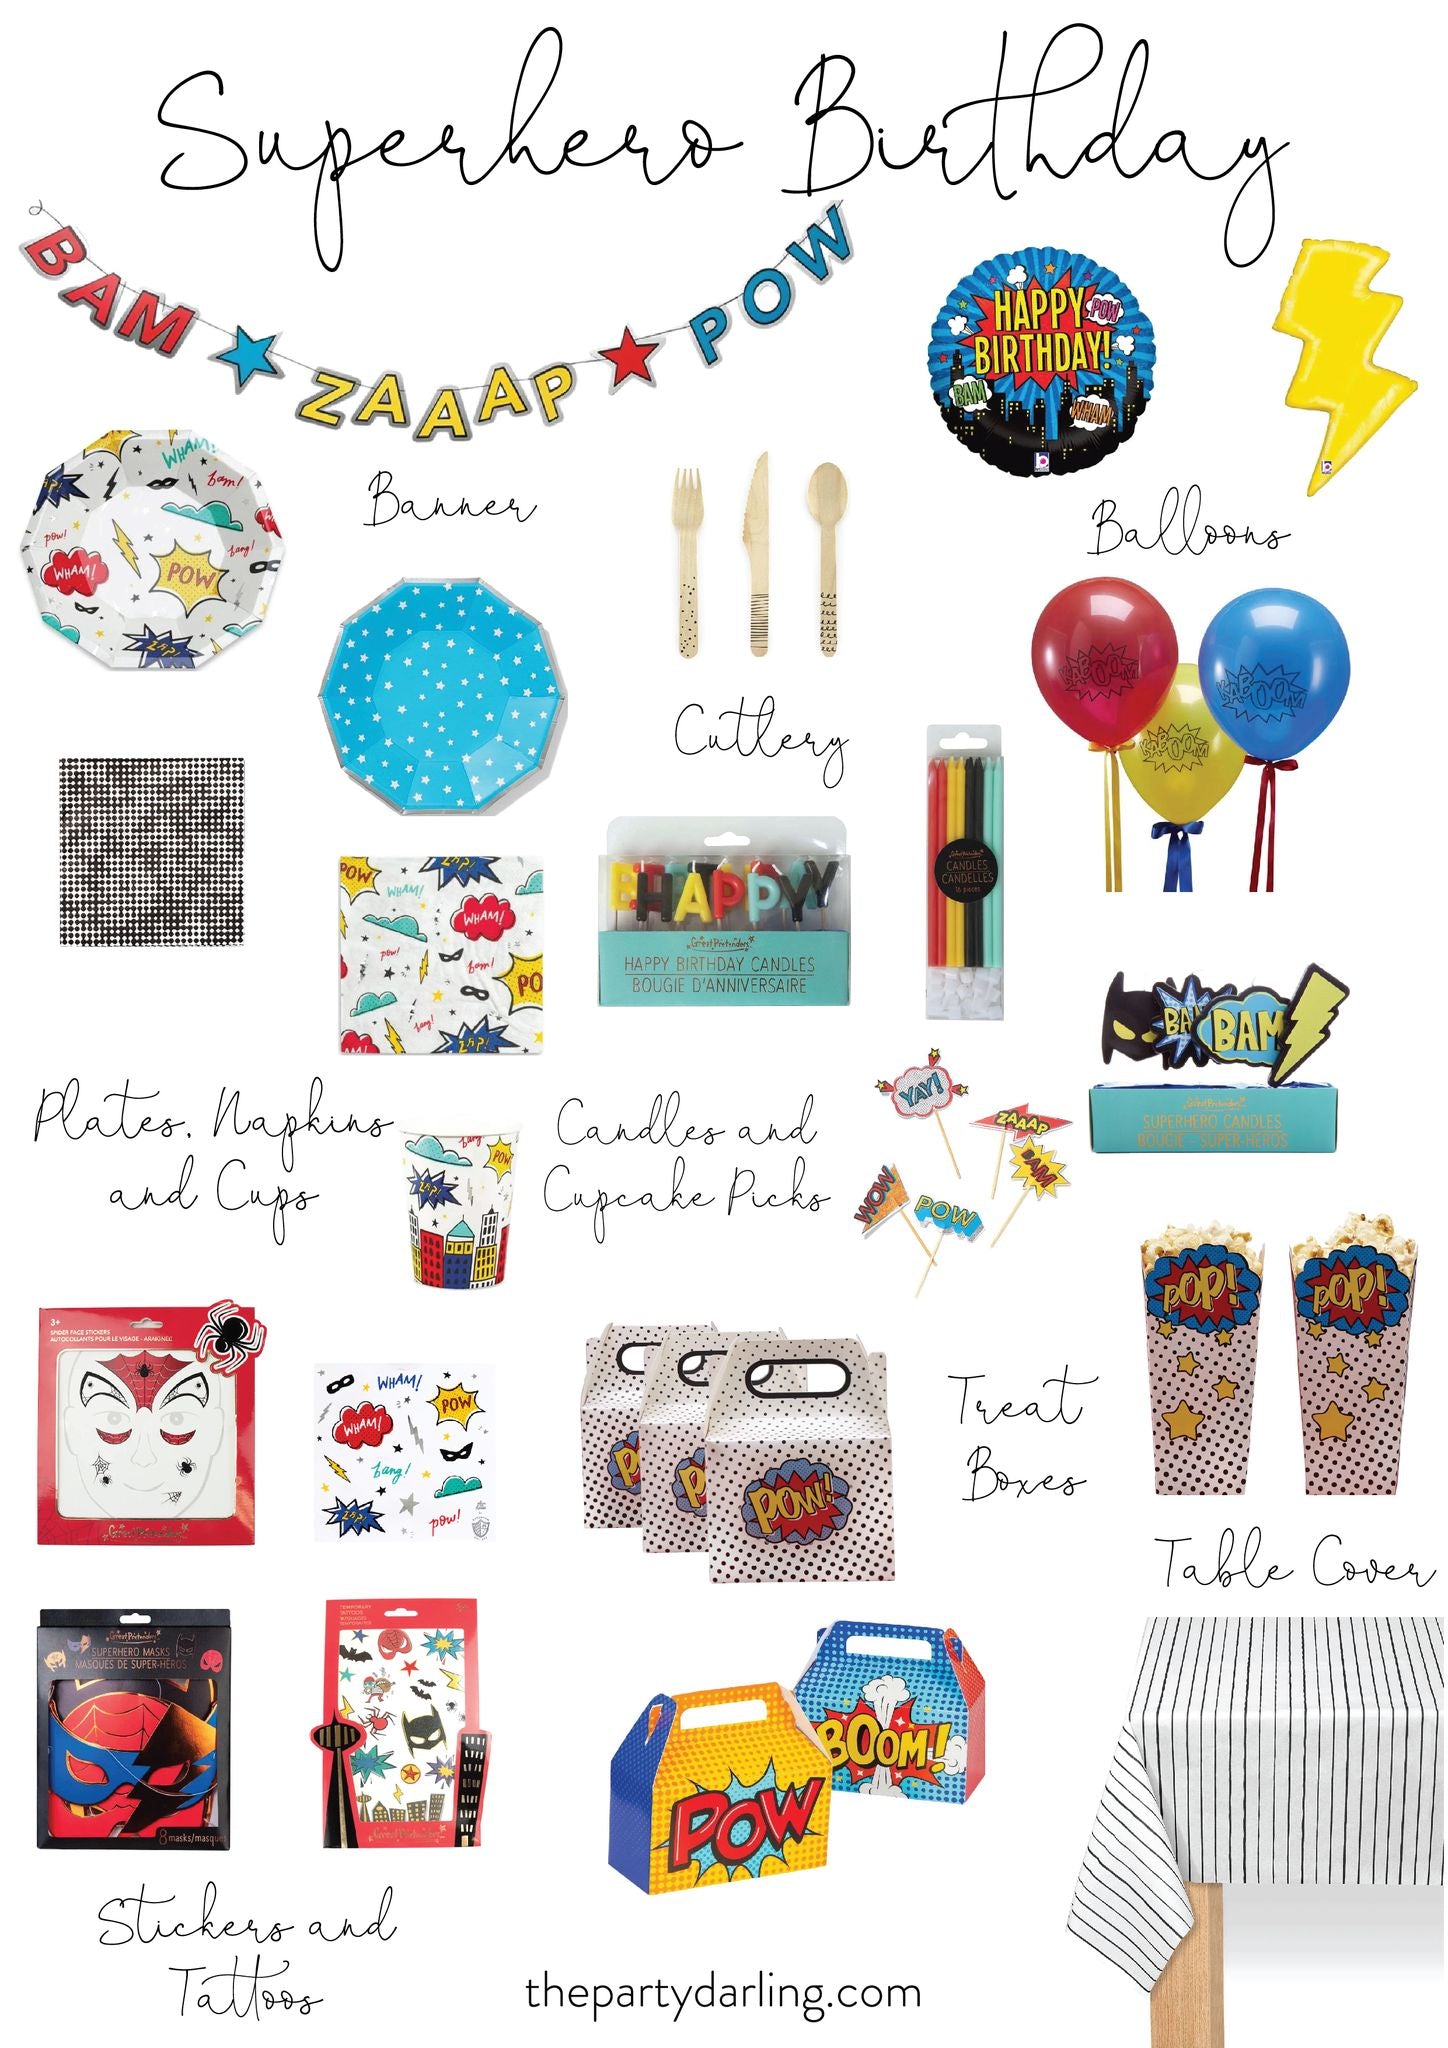 Happy Birthday Superhero Candles 13 ct | The Party Darling